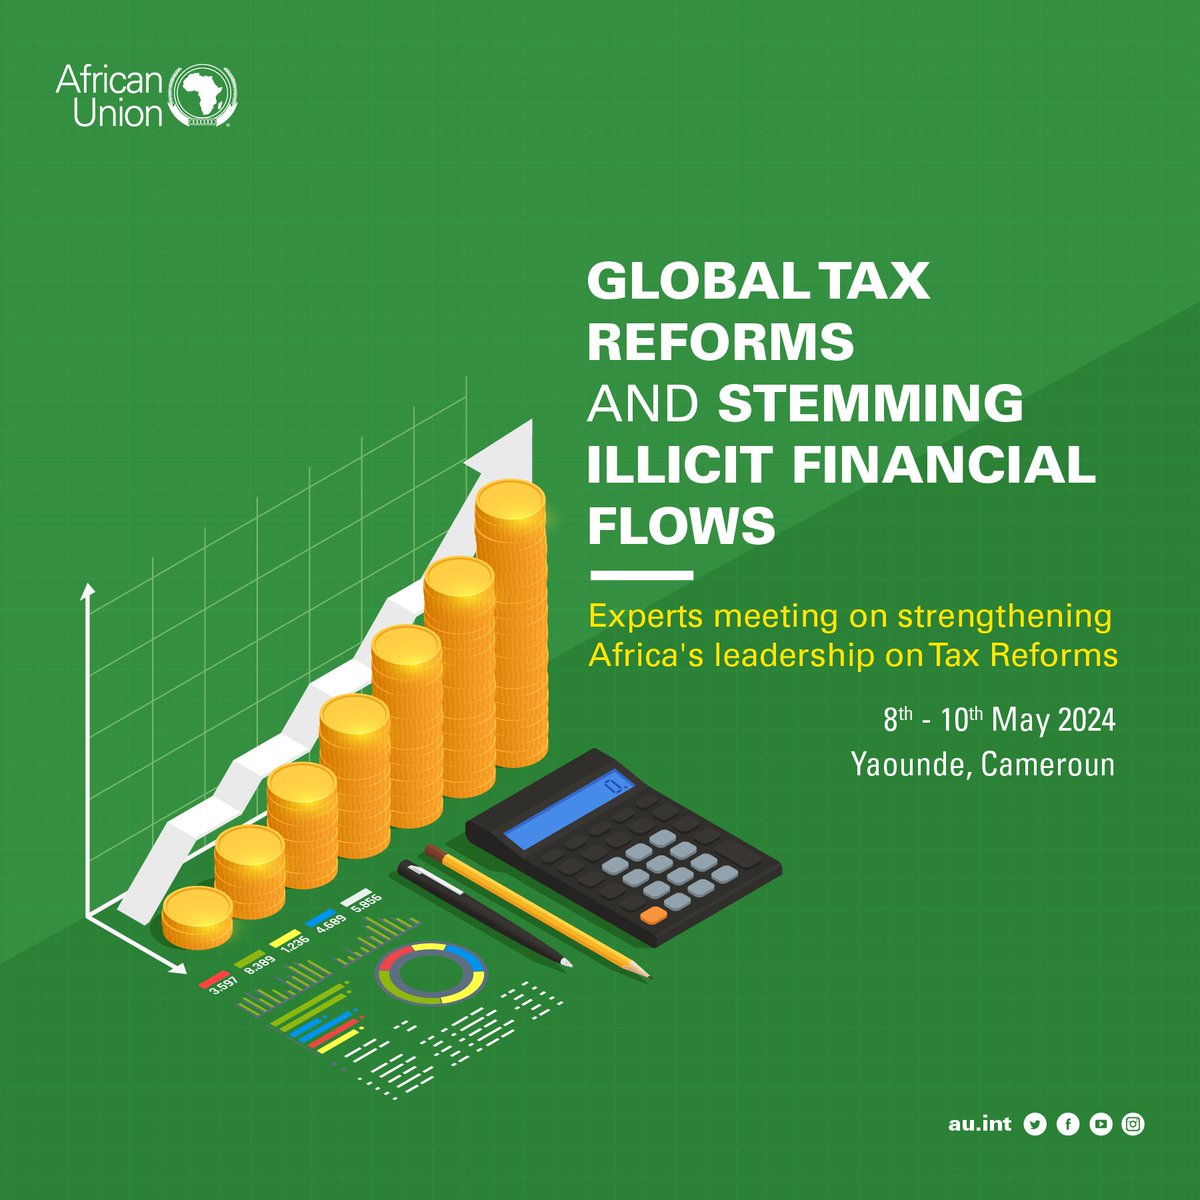 Africa loses $89B annually to illicit financial flows, equating to 3.7% of its GDP. Tax incentives contribute to a further $220B loss. These challenges require concerted efforts to promote fiscal transparency & efficiency in tax administration. Brief ♾️ow.ly/mo8y50RmXST